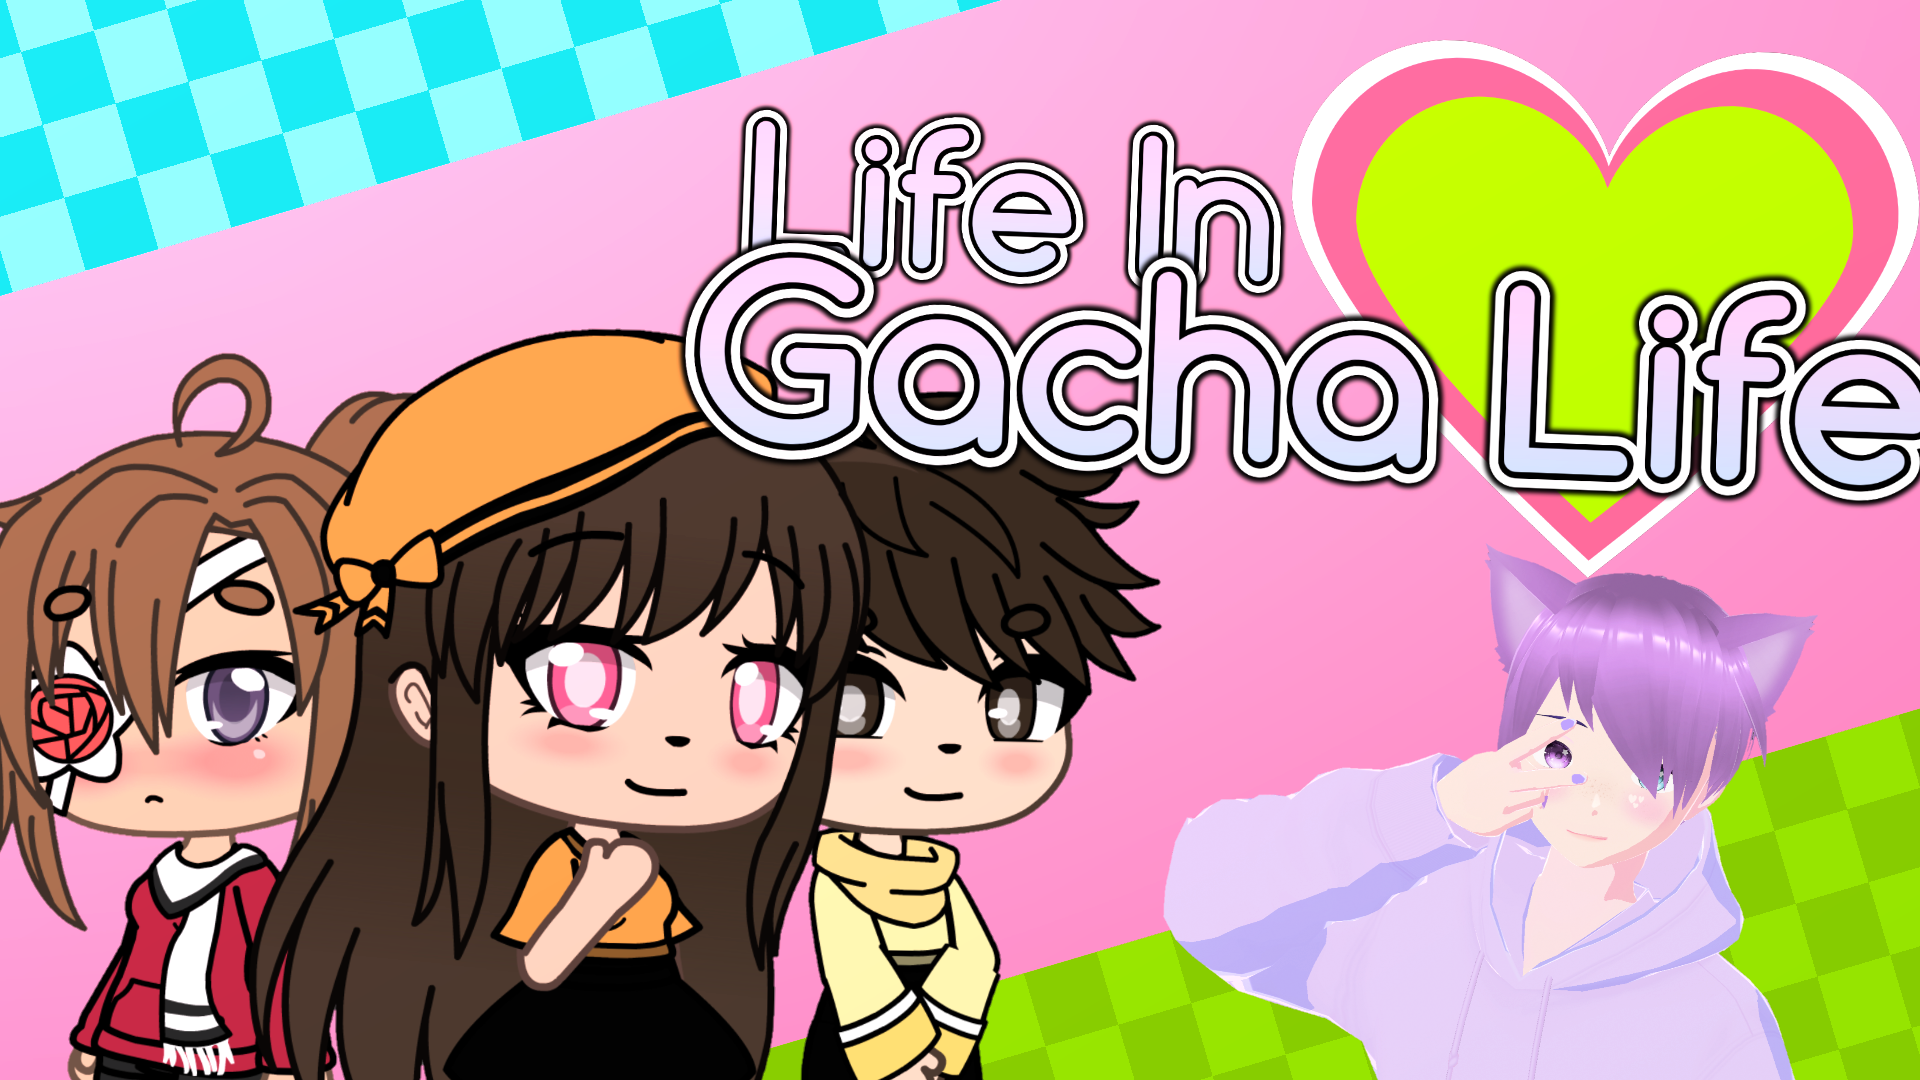 Gacha Life for Android - Download